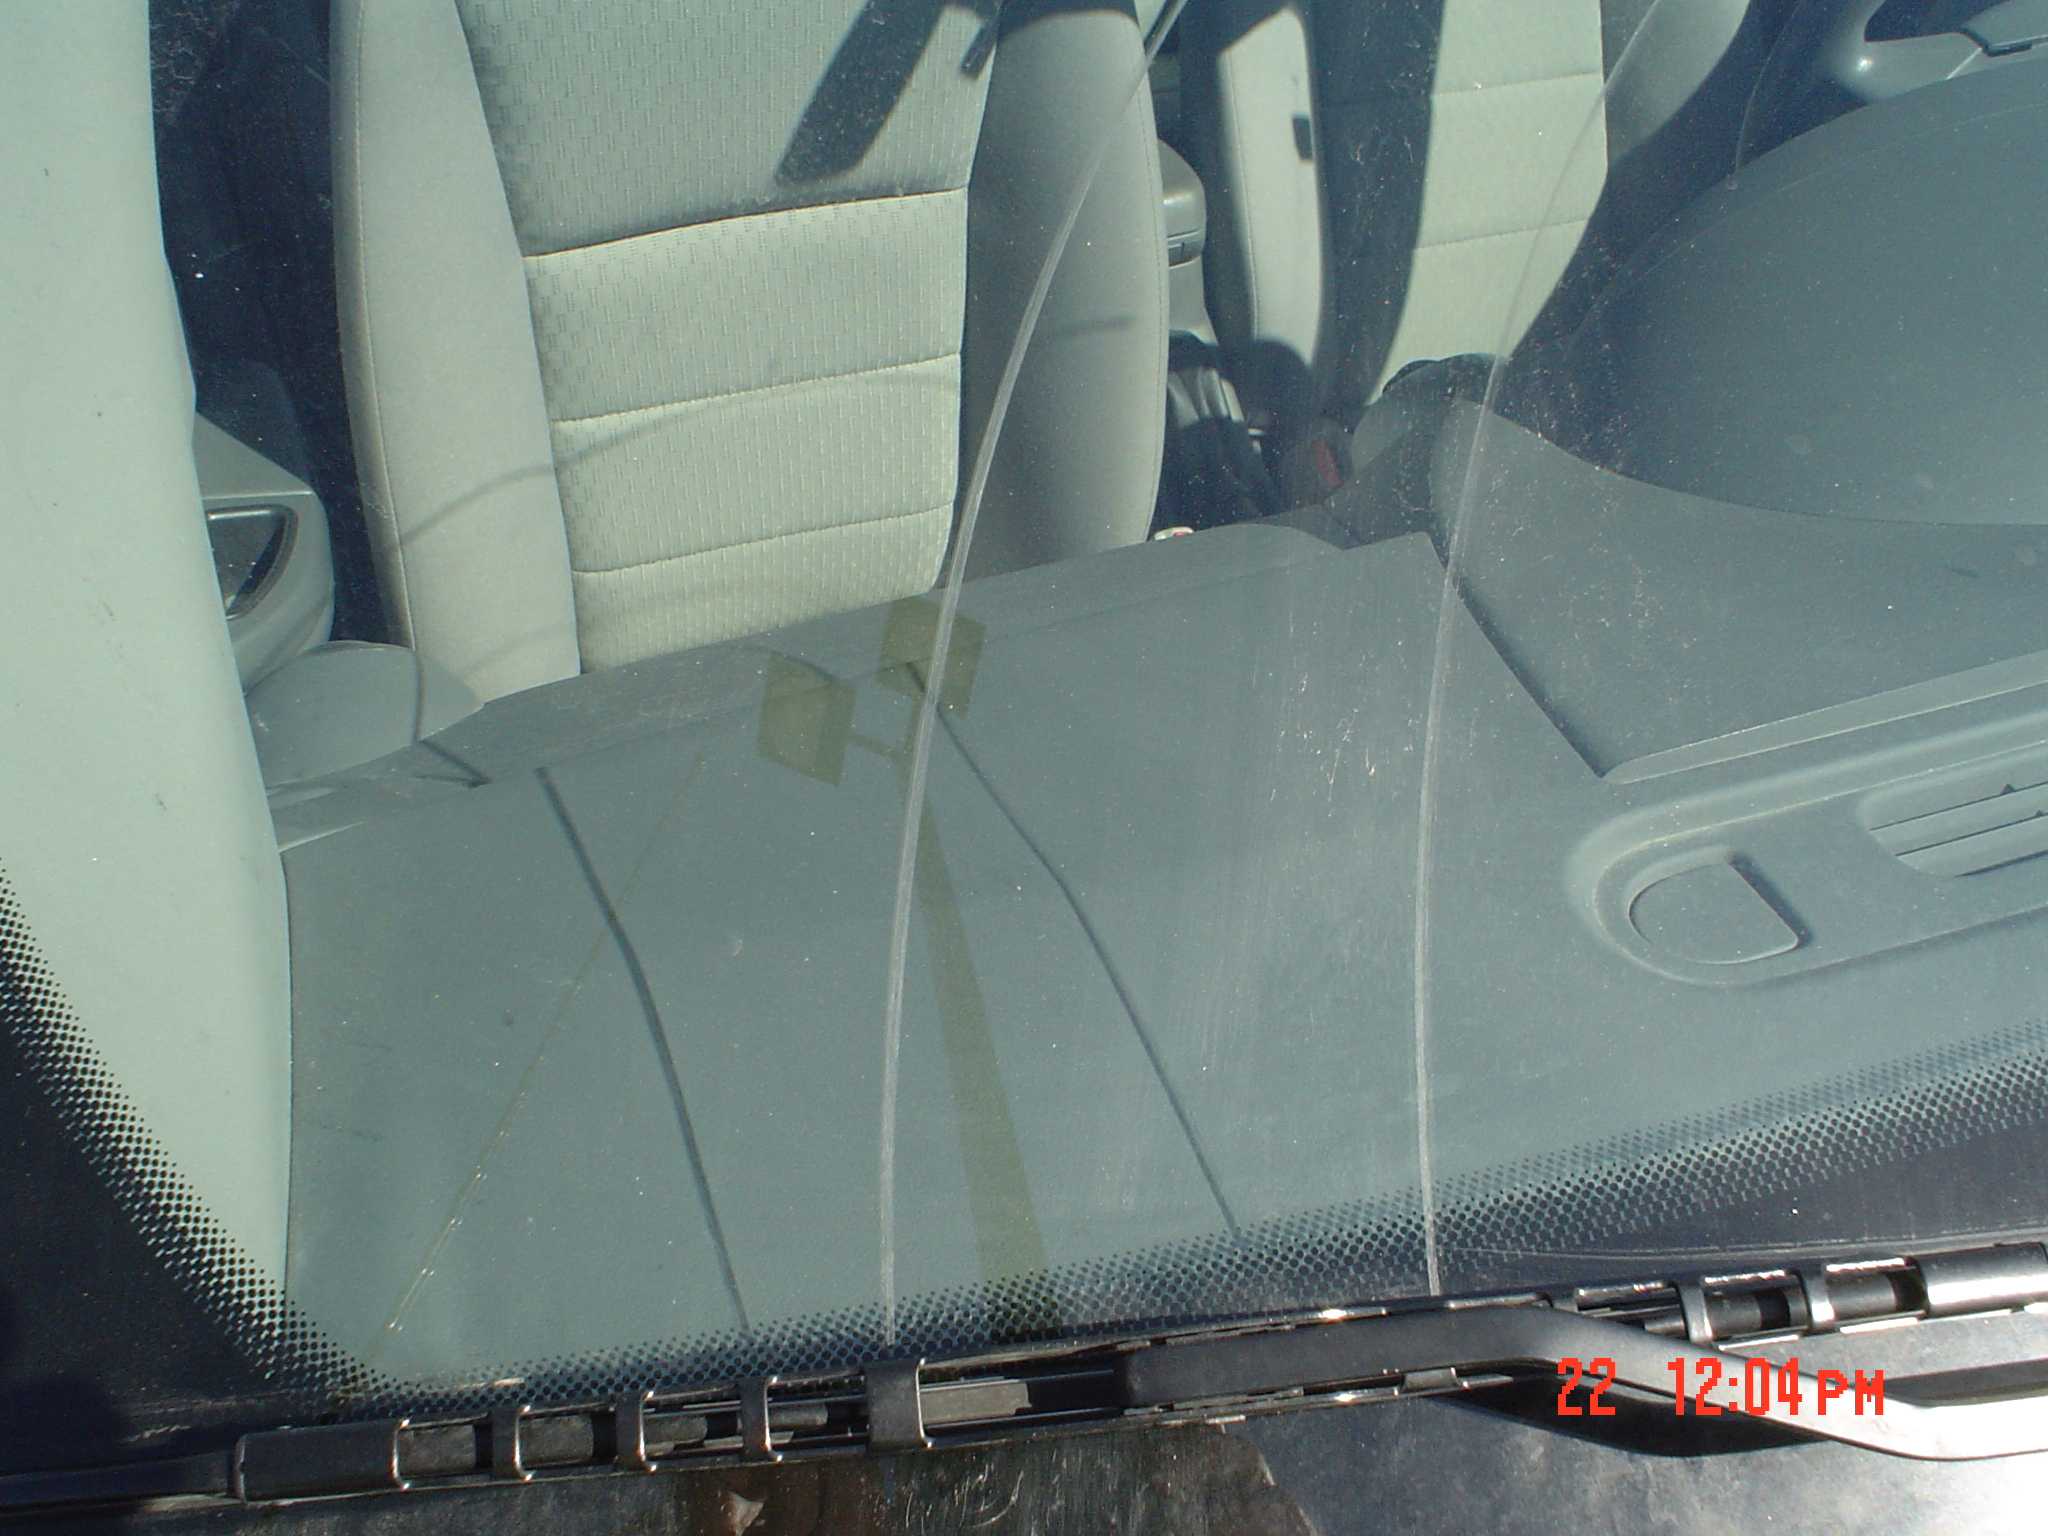 How do you remove windshield scratches?